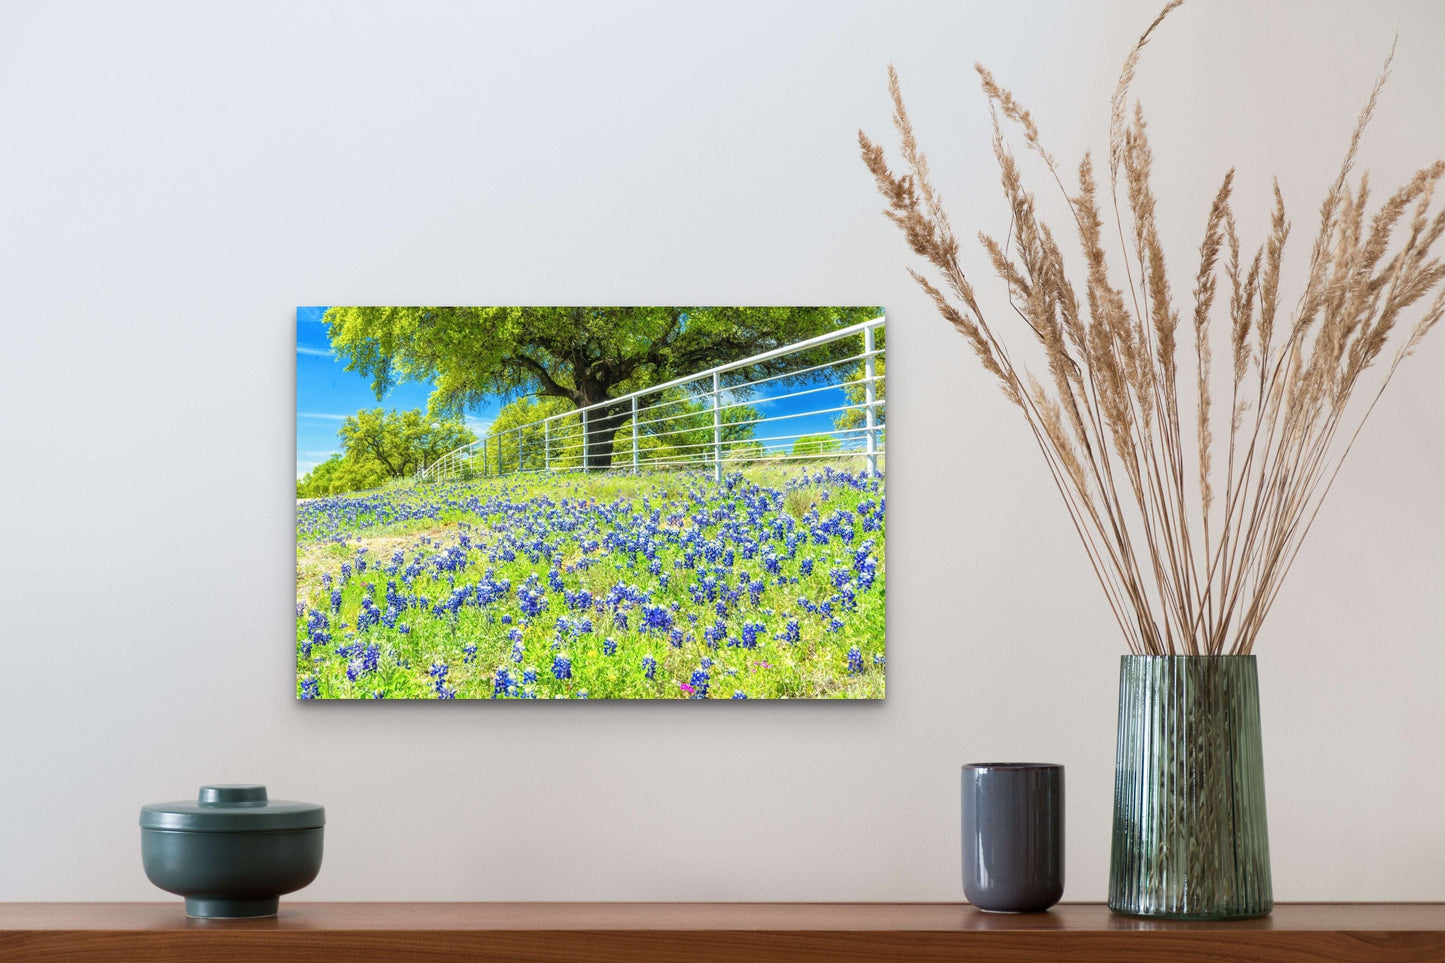 Wimberley Puzzle Company Posters, Prints, & Visual Artwork 16x24" Roadside Bluebonnets, Texas Wildflower Wooden Art and Postcards